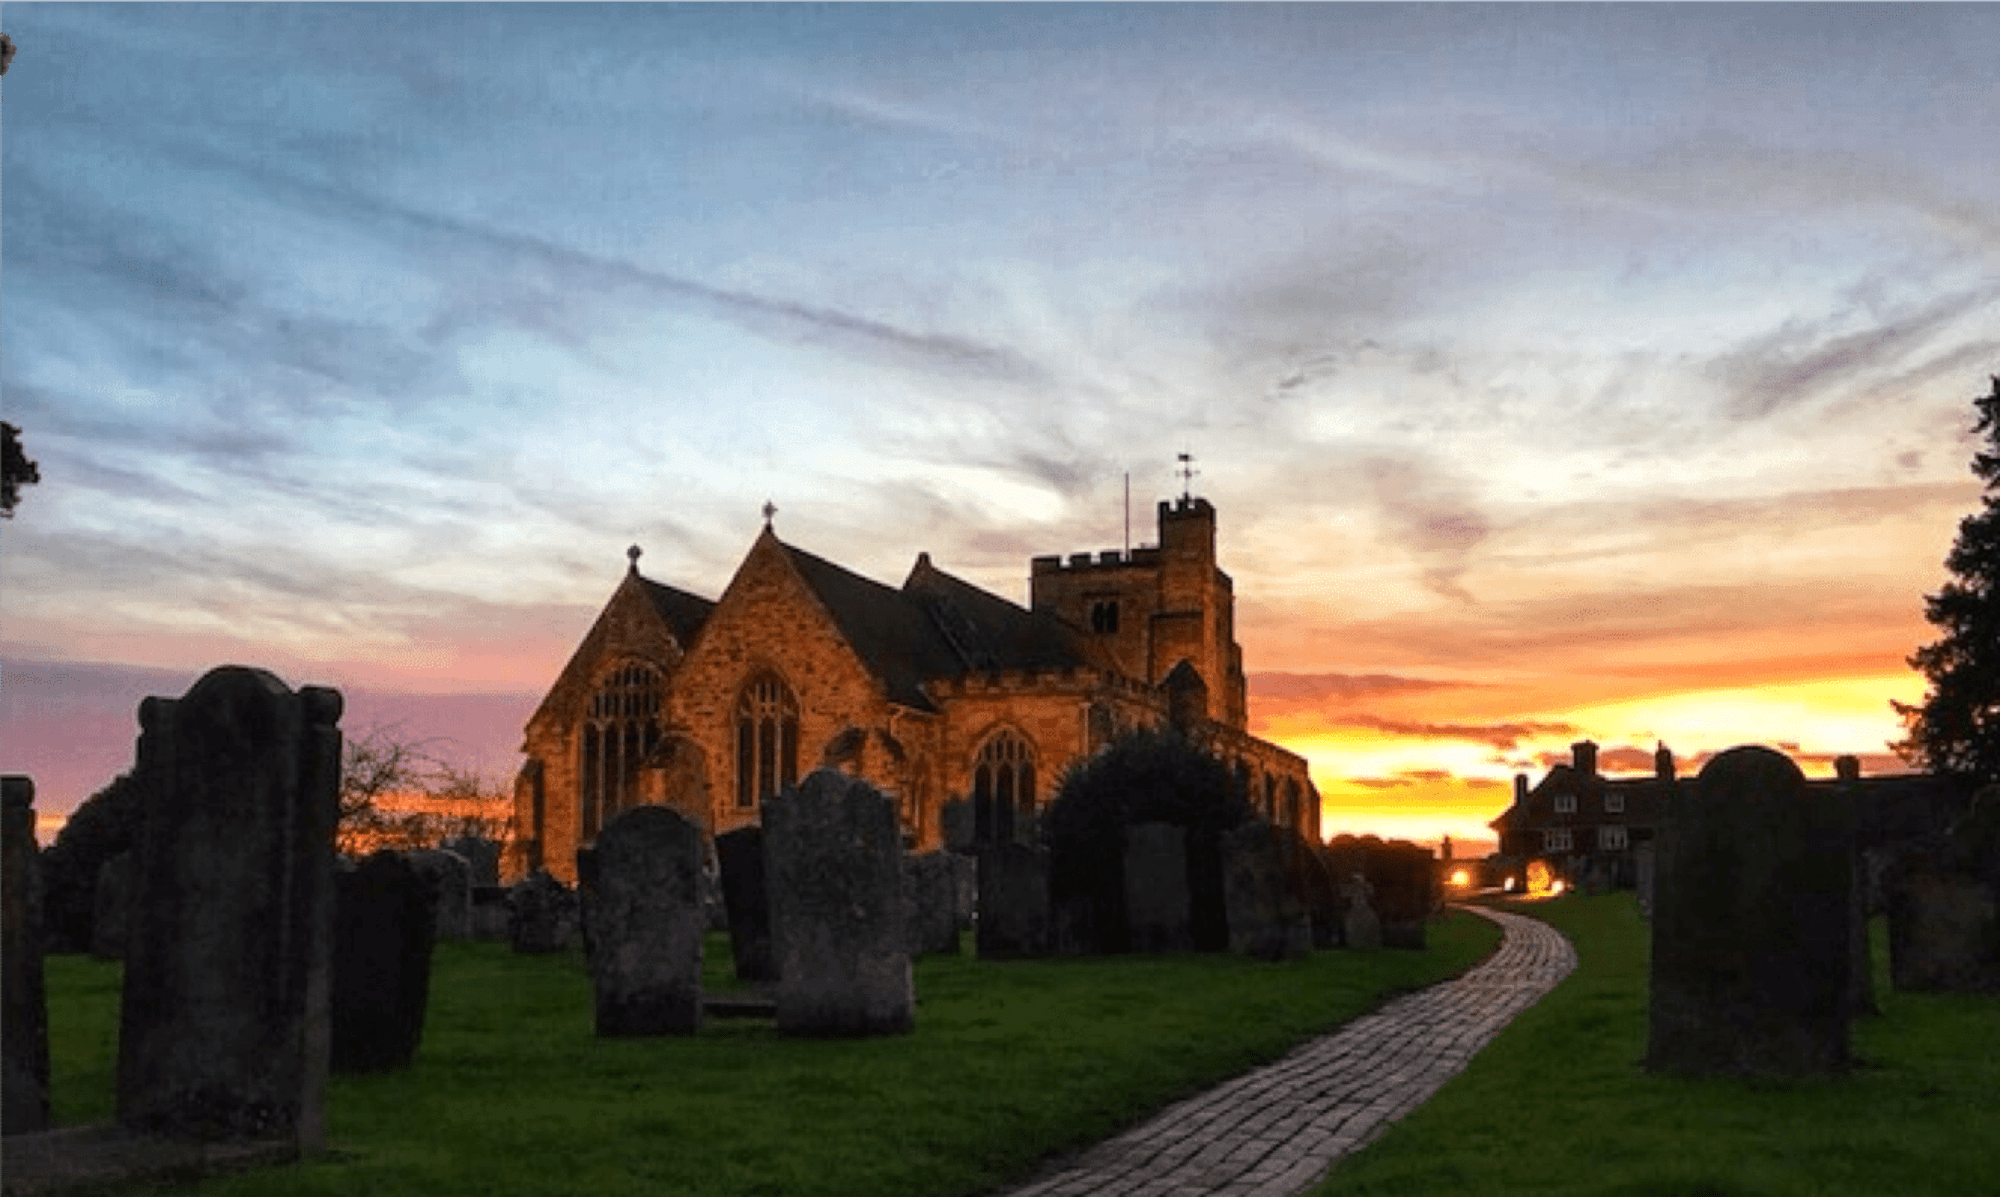 St Mary's at sunset